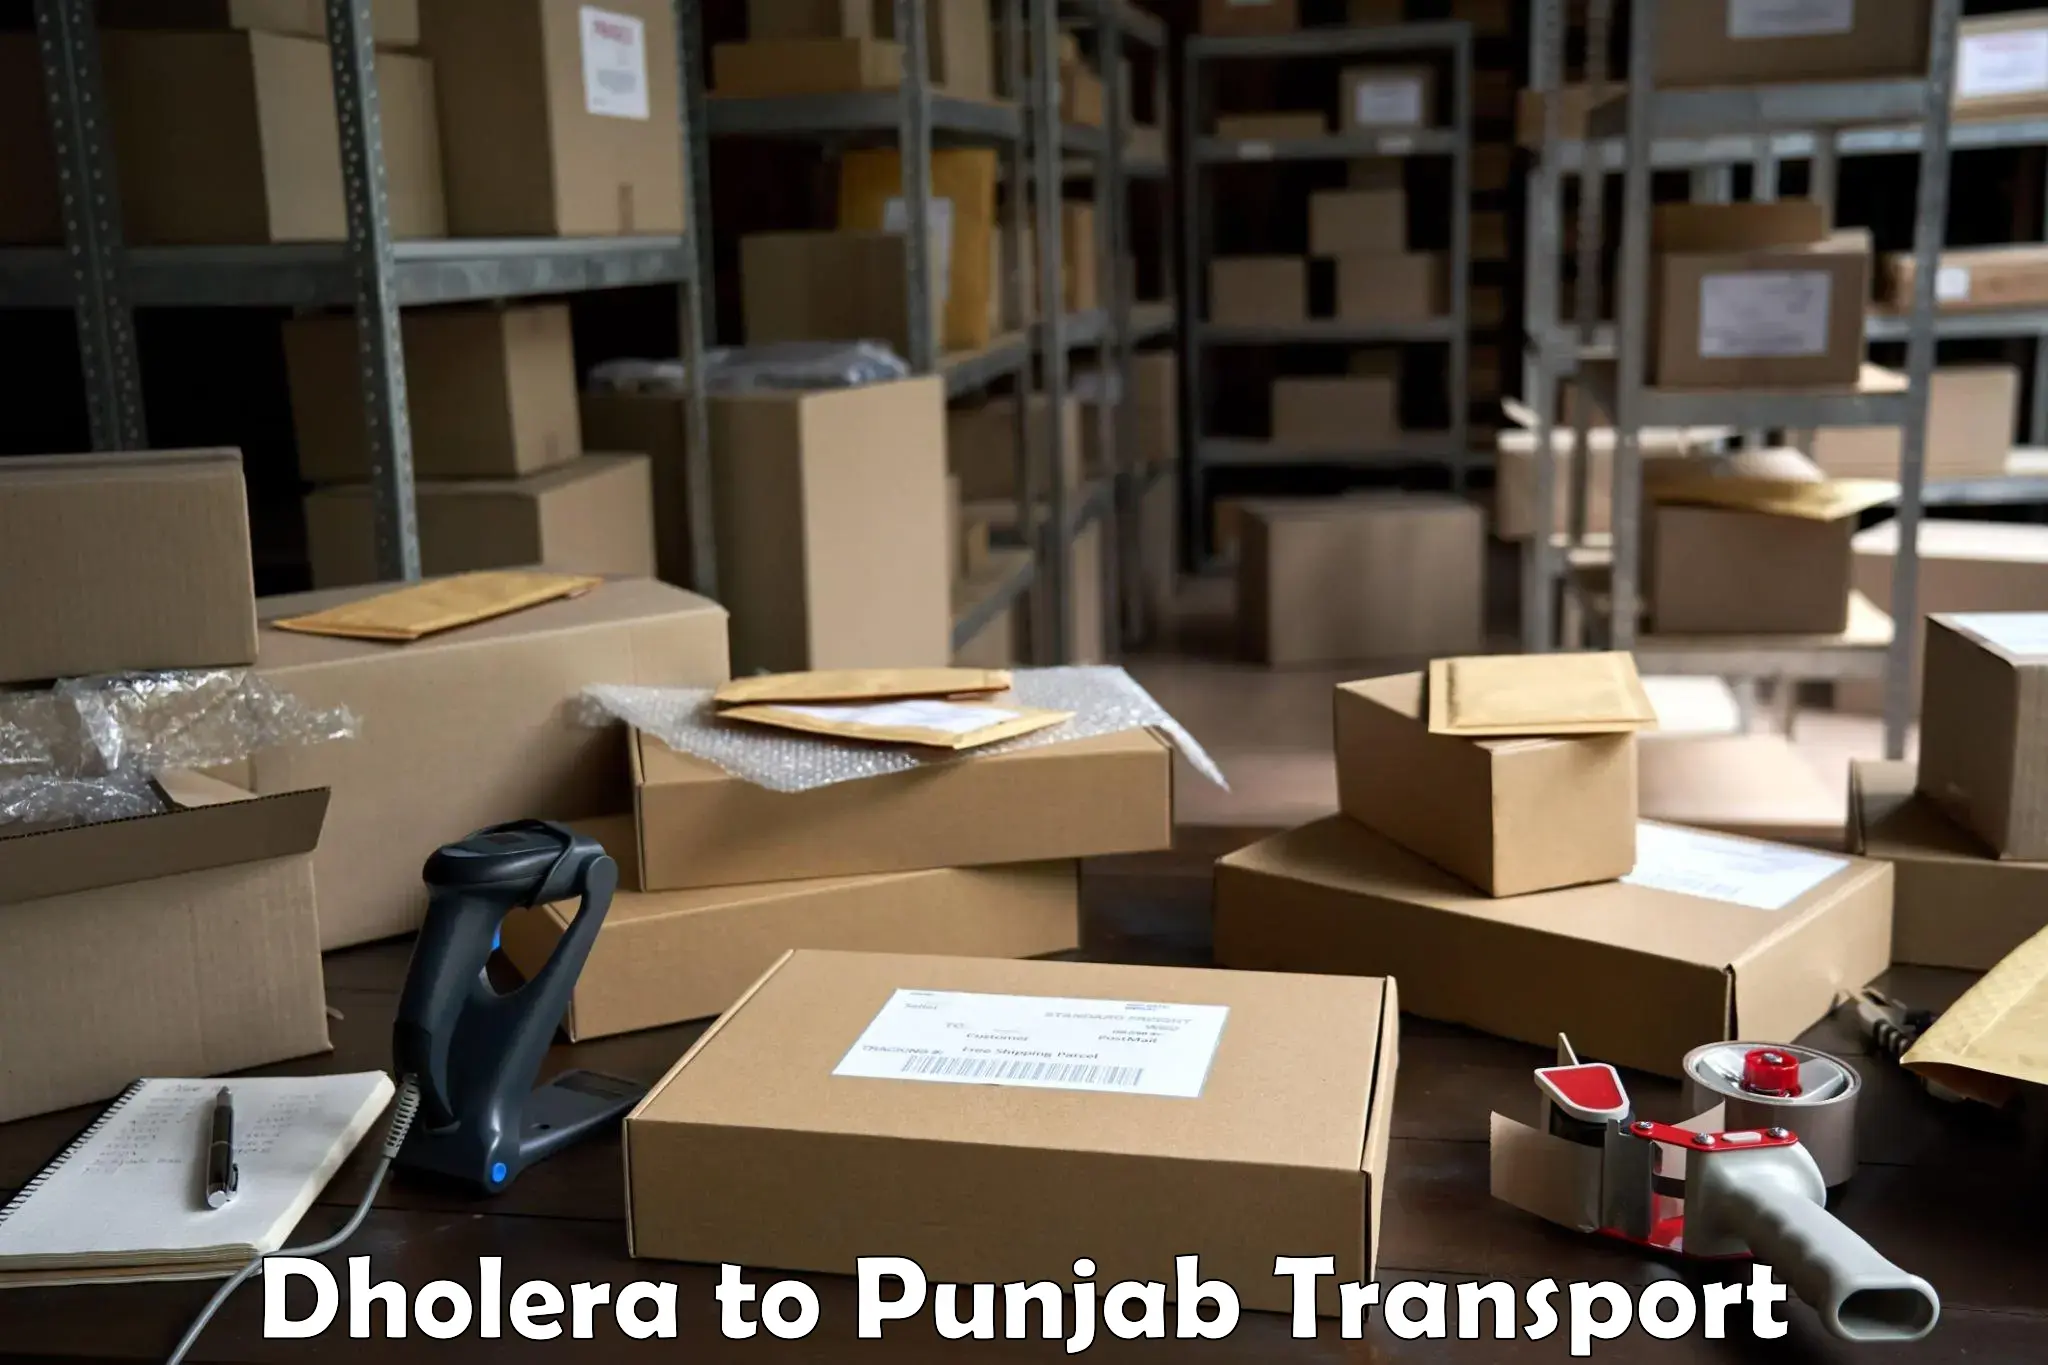 Daily transport service in Dholera to Patiala